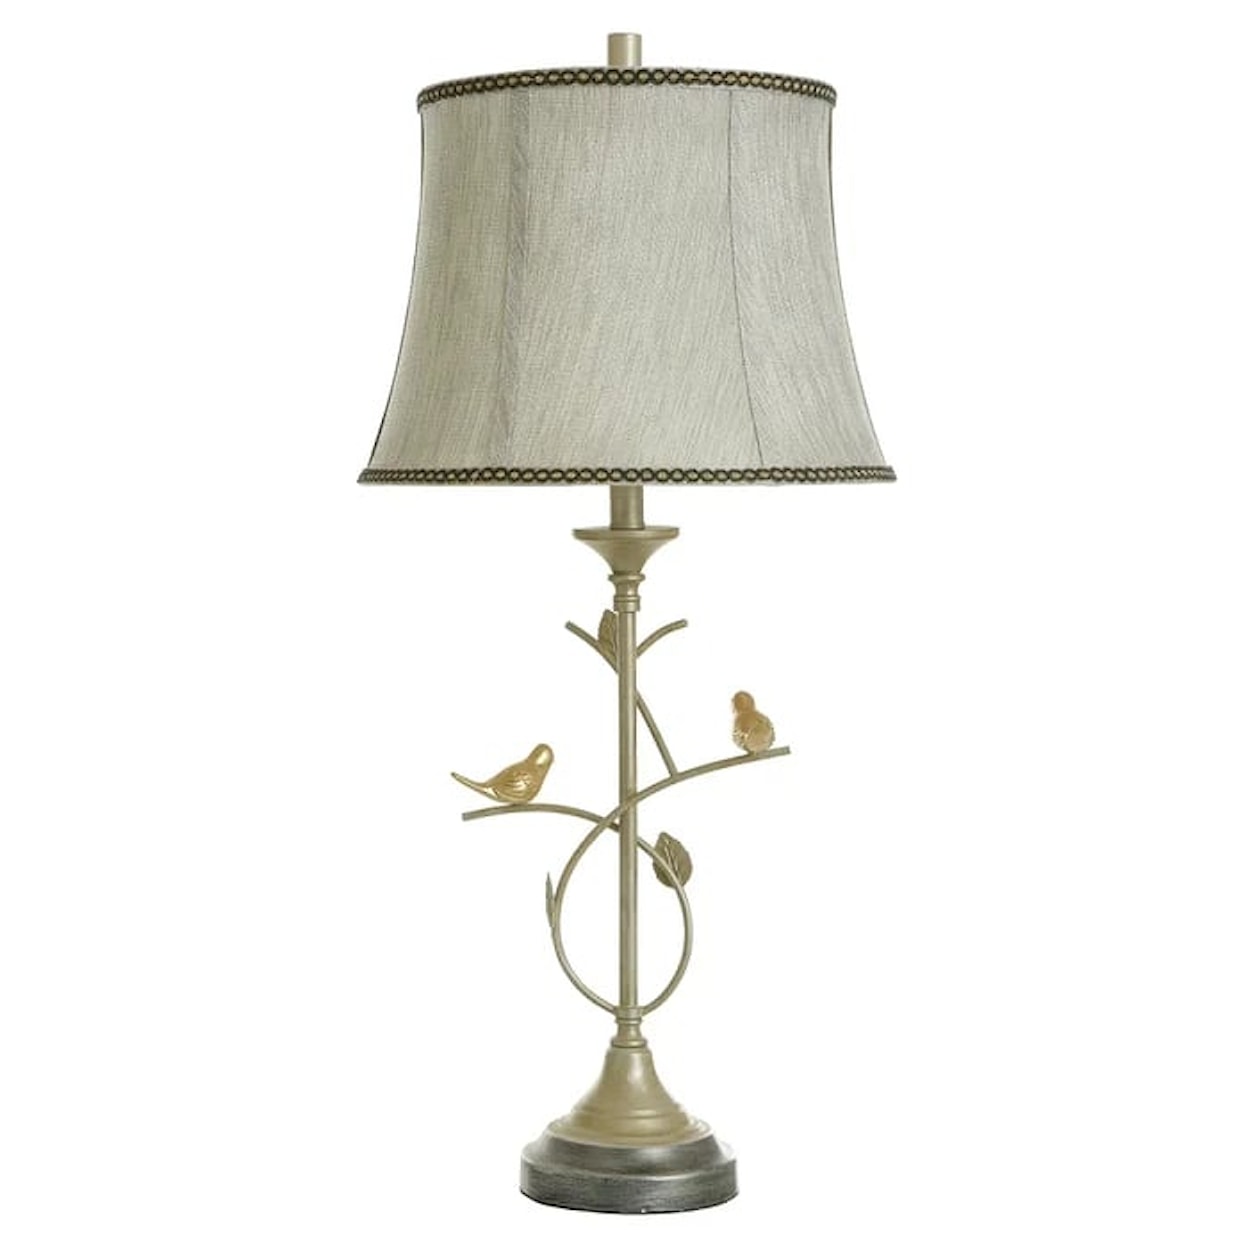 StyleCraft Lamps Ascoli Silver Traditional Table Lamp